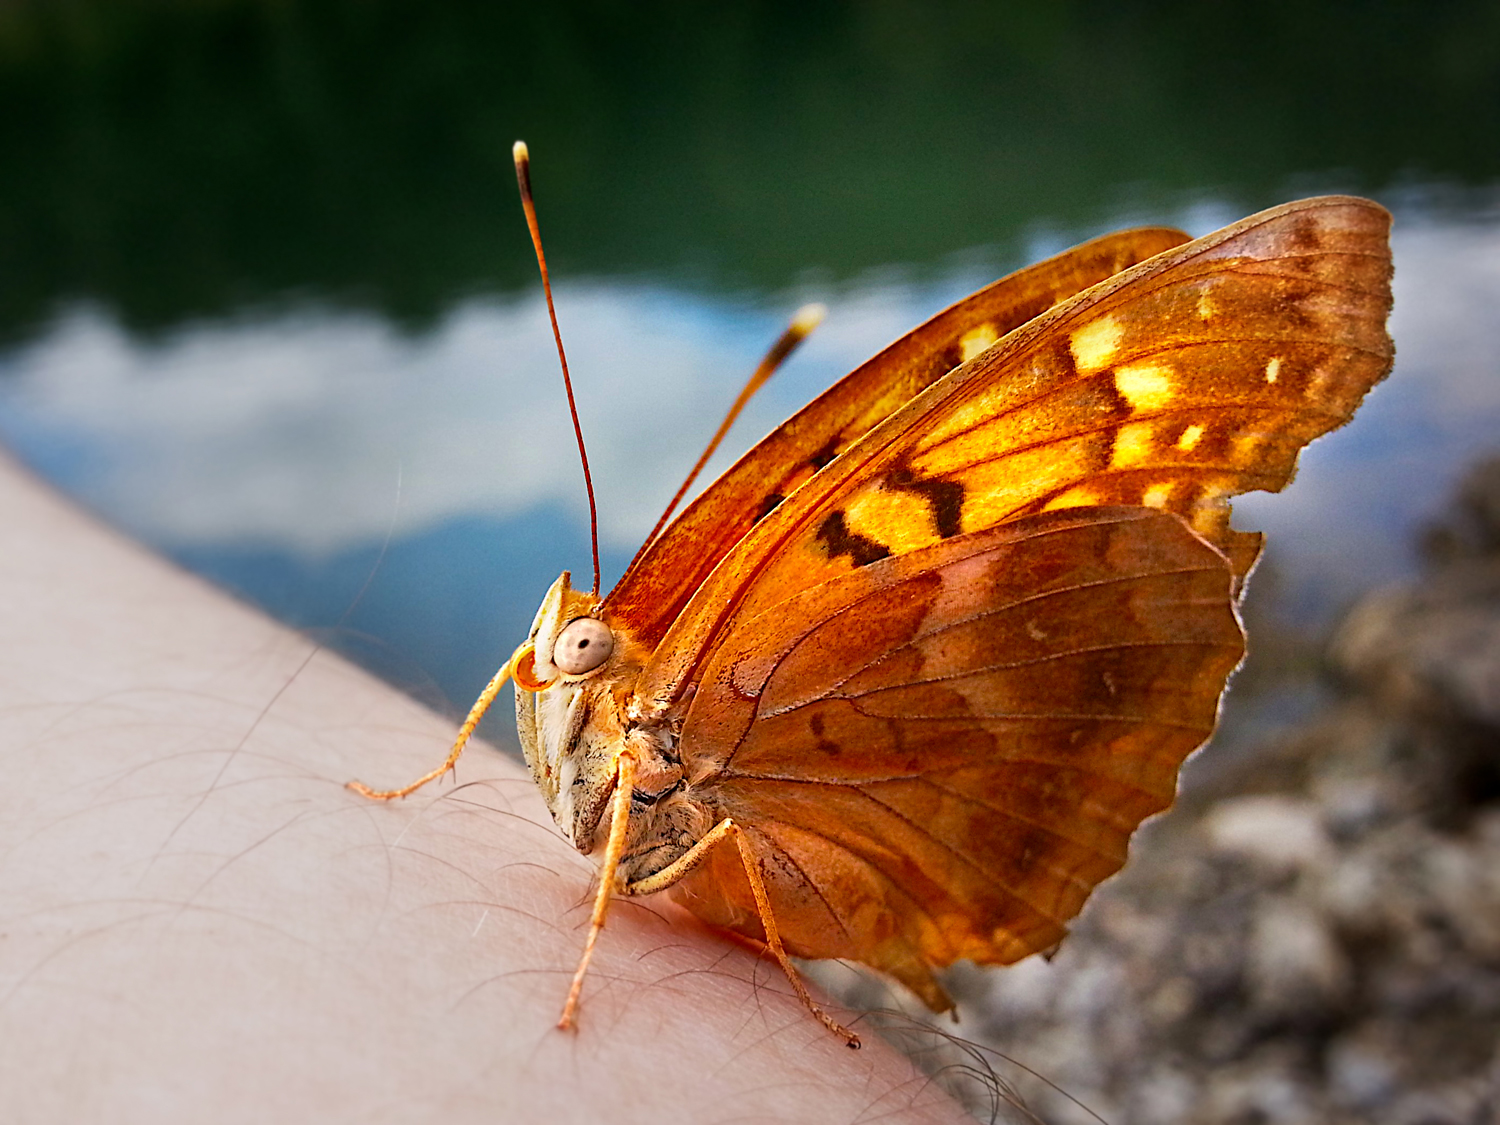 20130915_143001-Butterfly-saved-from-drowning-in-TN-sm.jpg